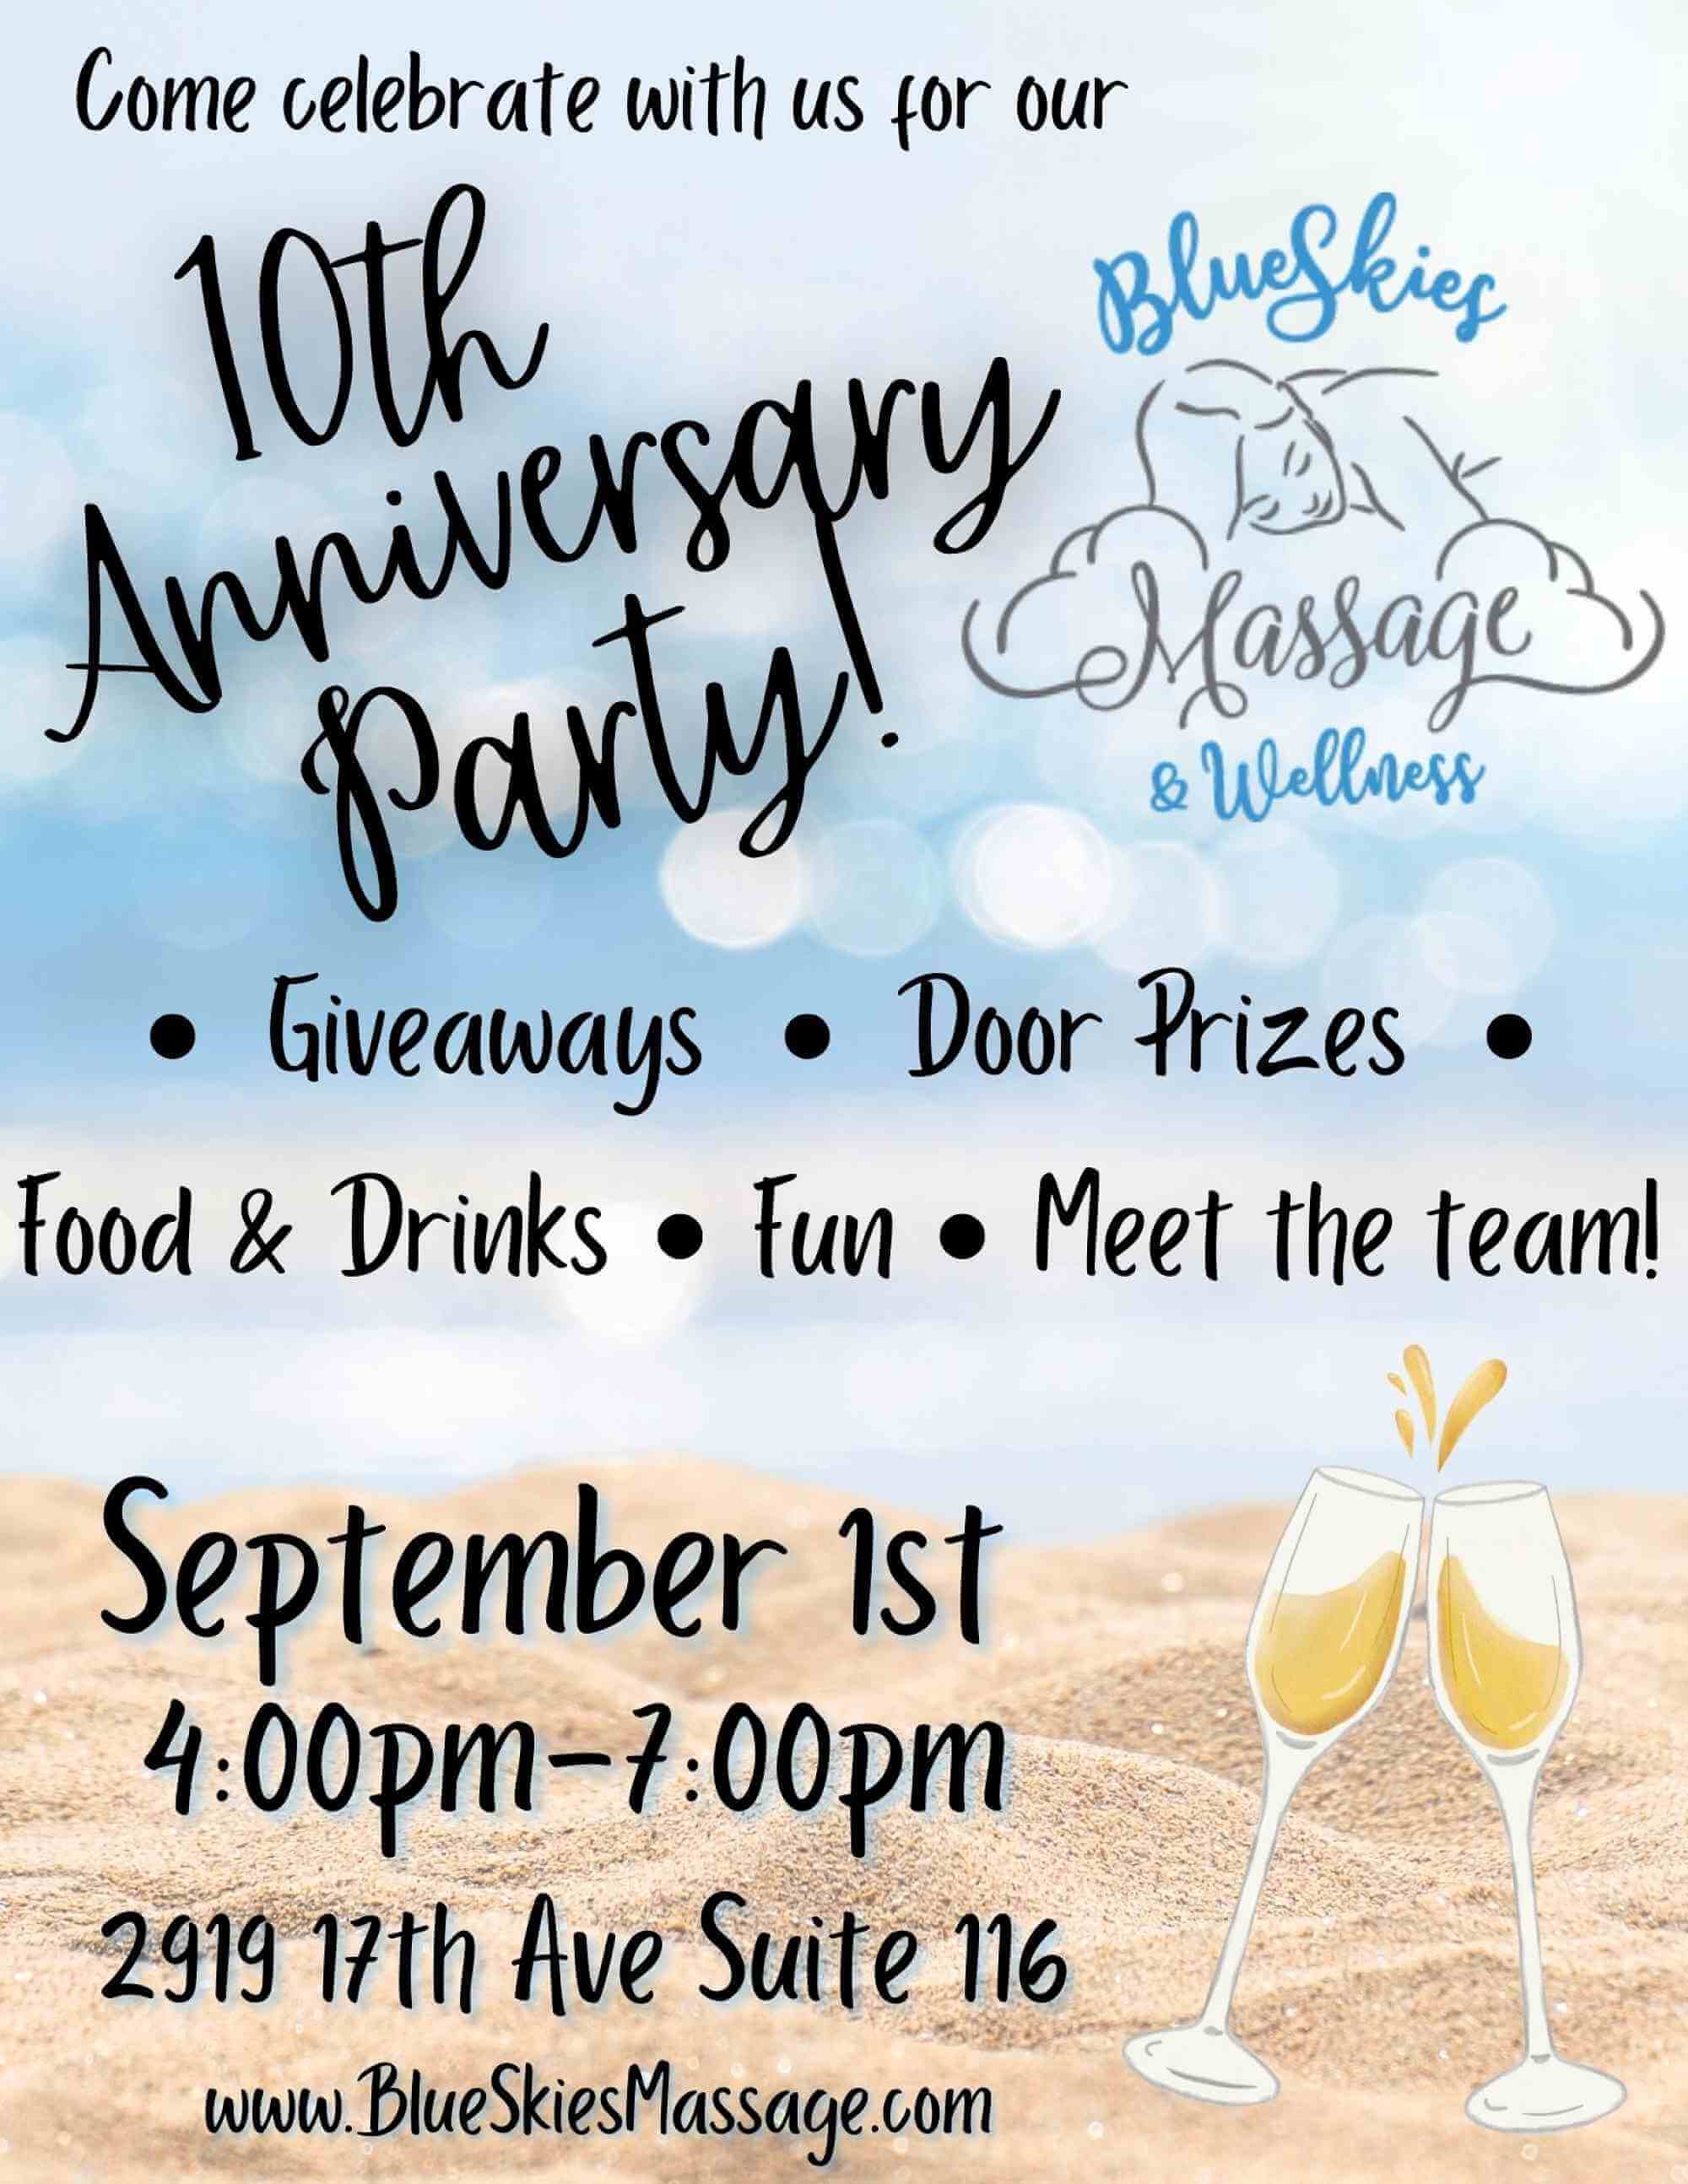 10th Anniversary Party!